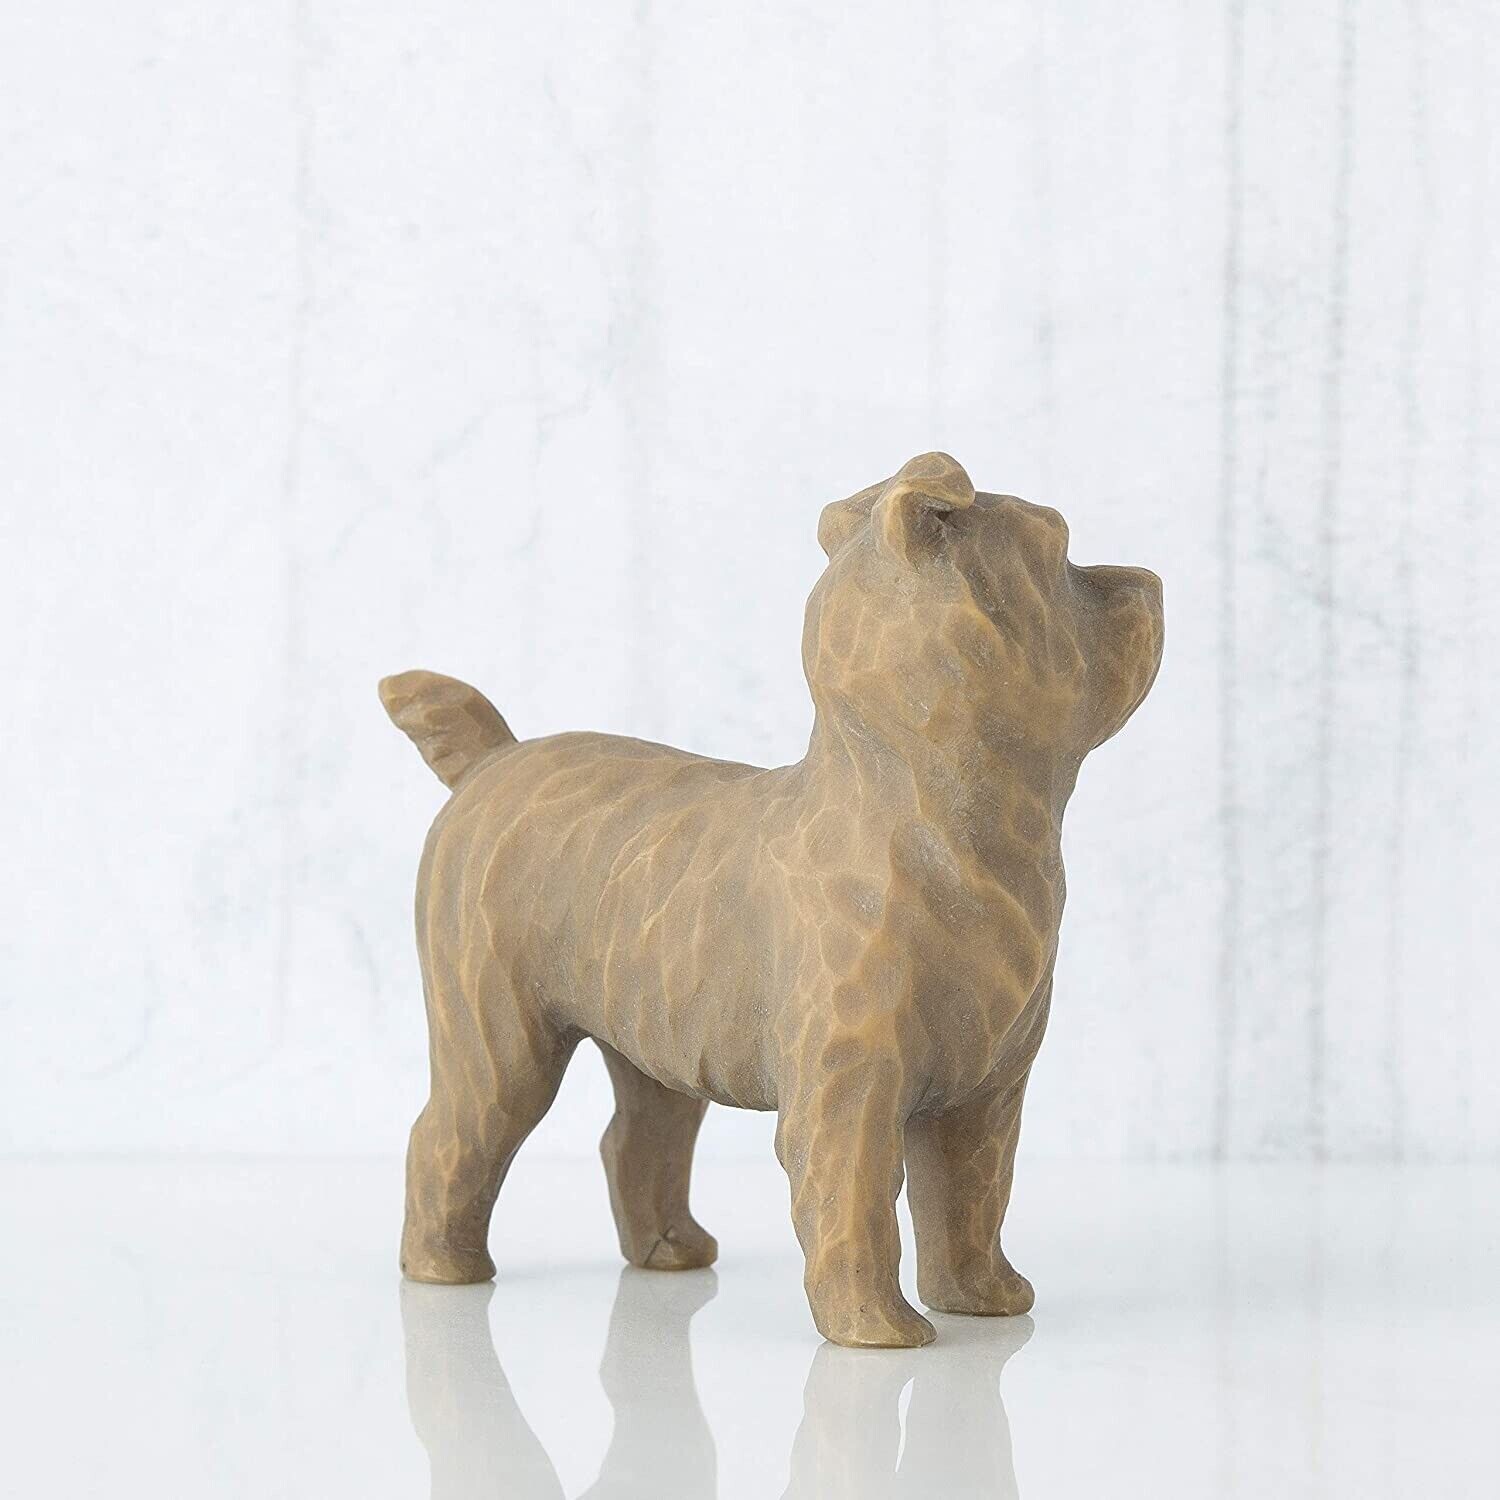 Buy Willow Tree Love My Dog (Small) from £9.95 (Today) – Best Deals on